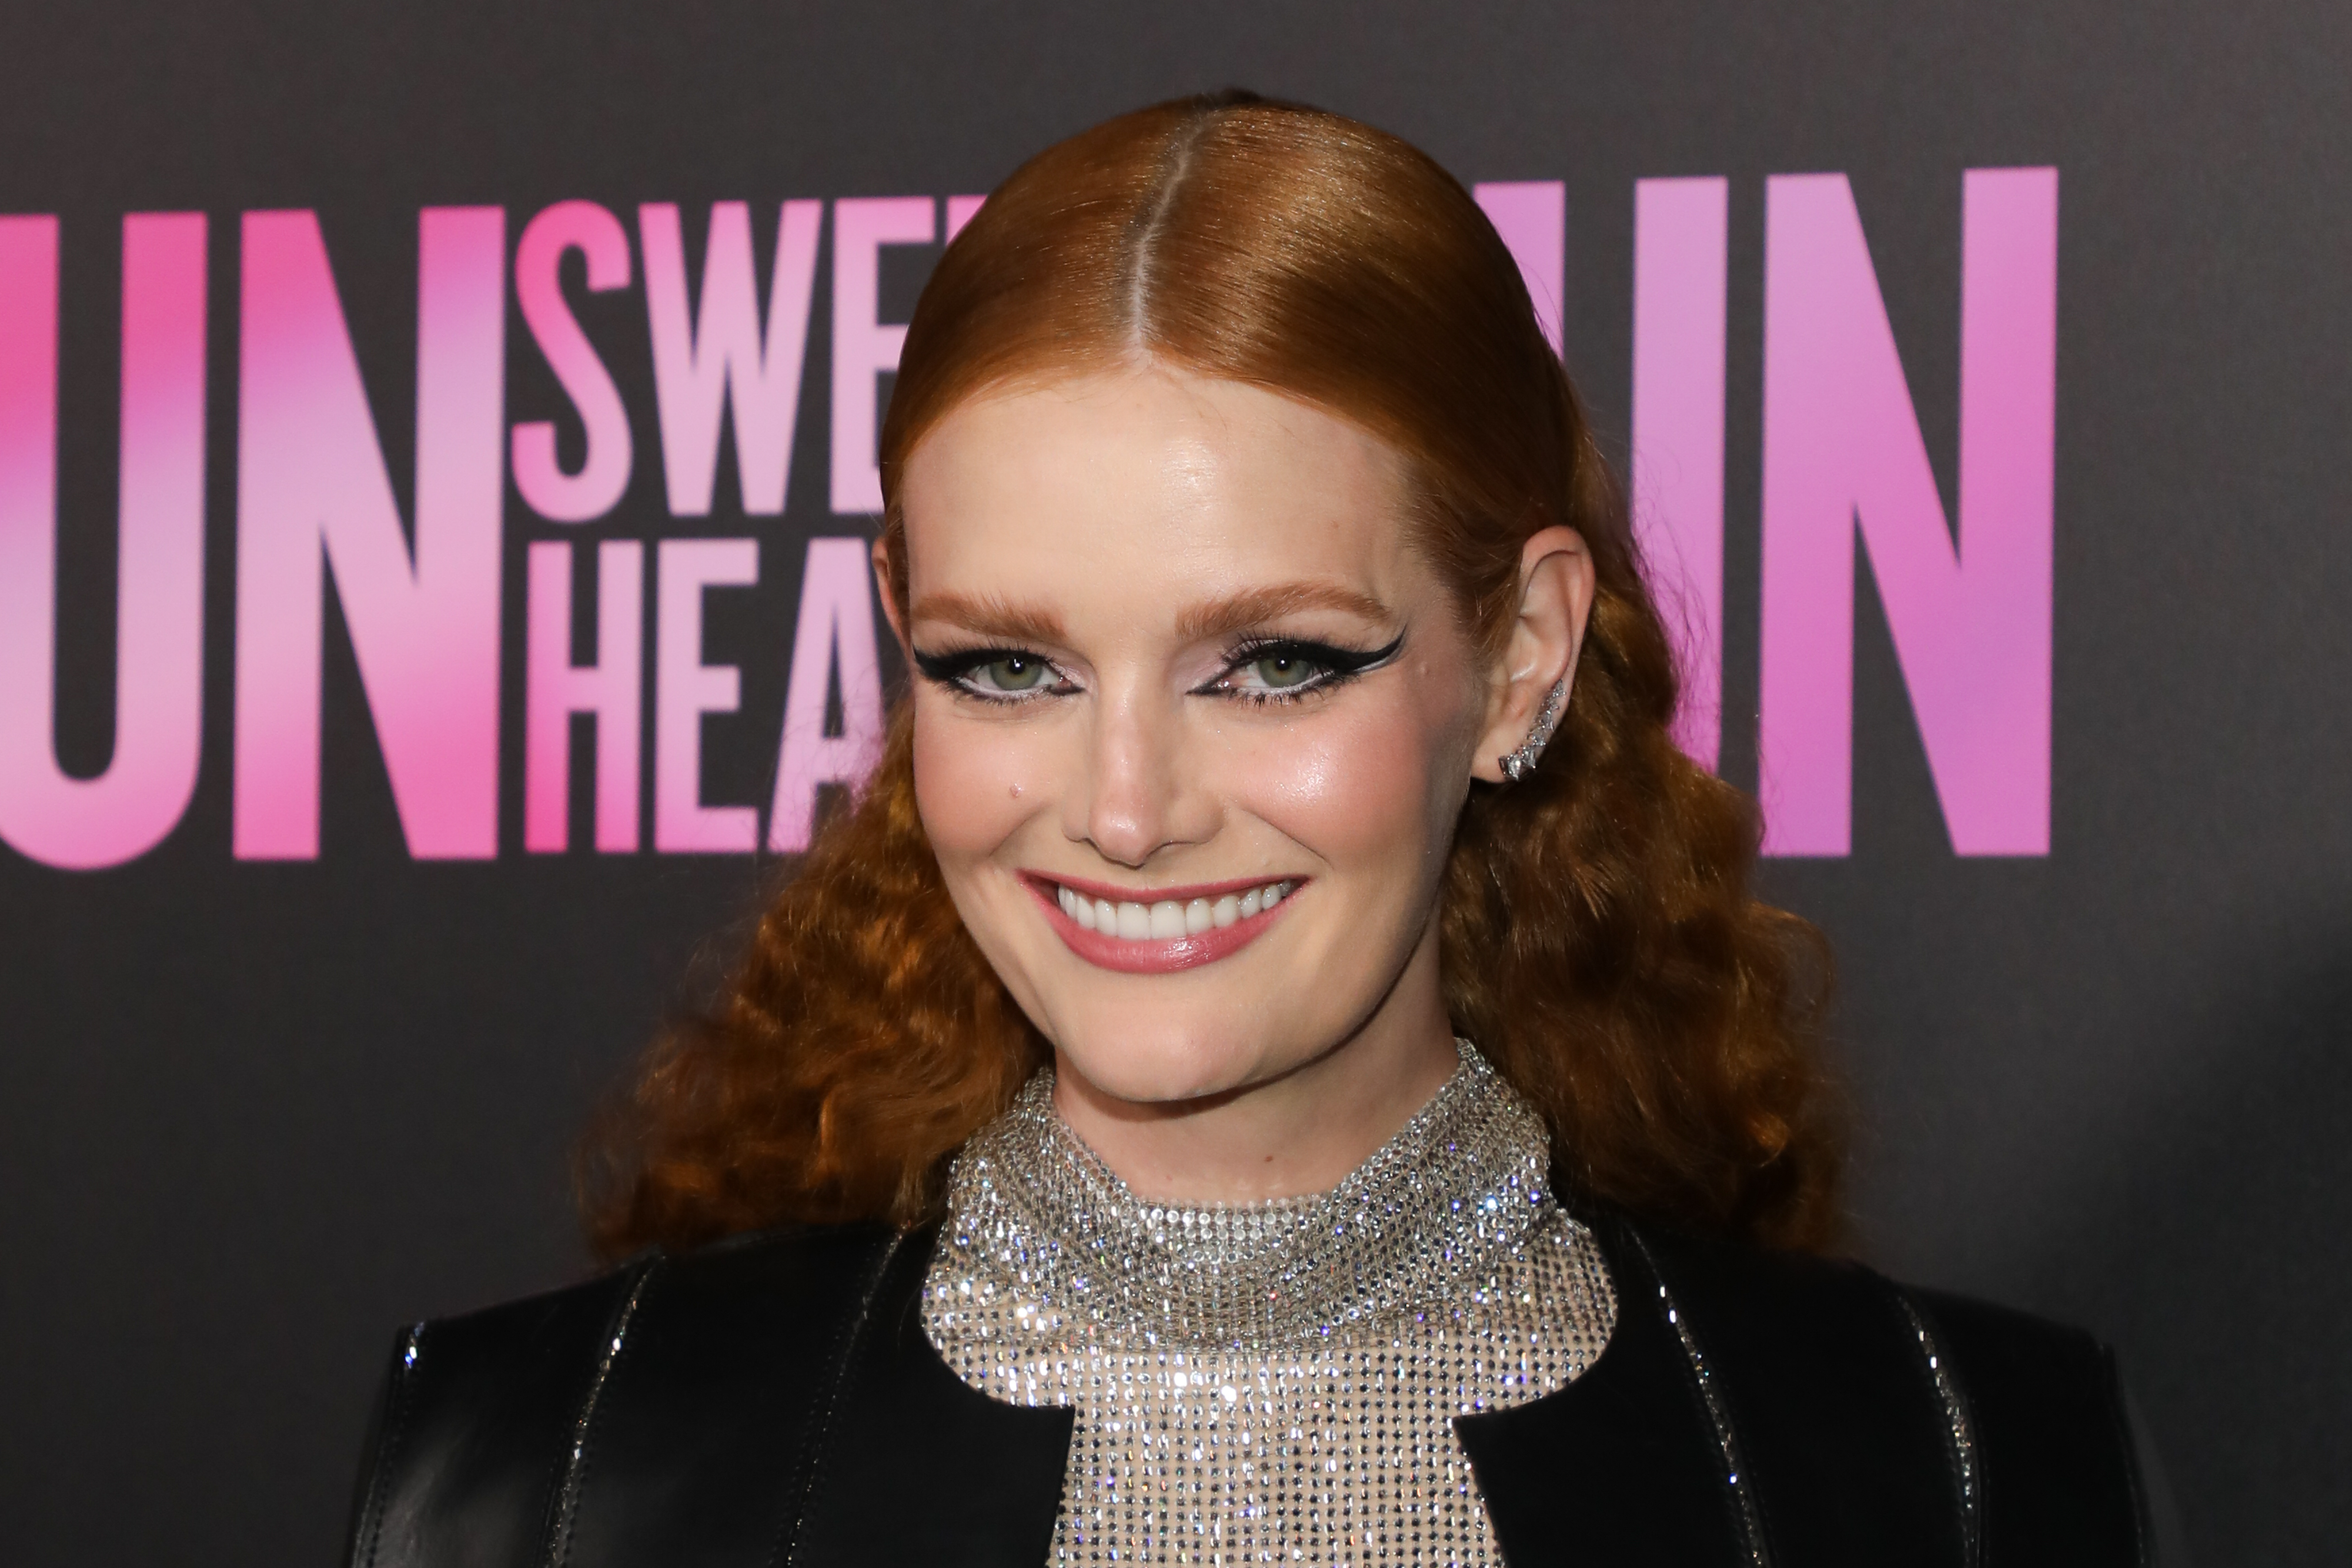 Lydia Hearst at the Ace Hotel in Los Angeles, California